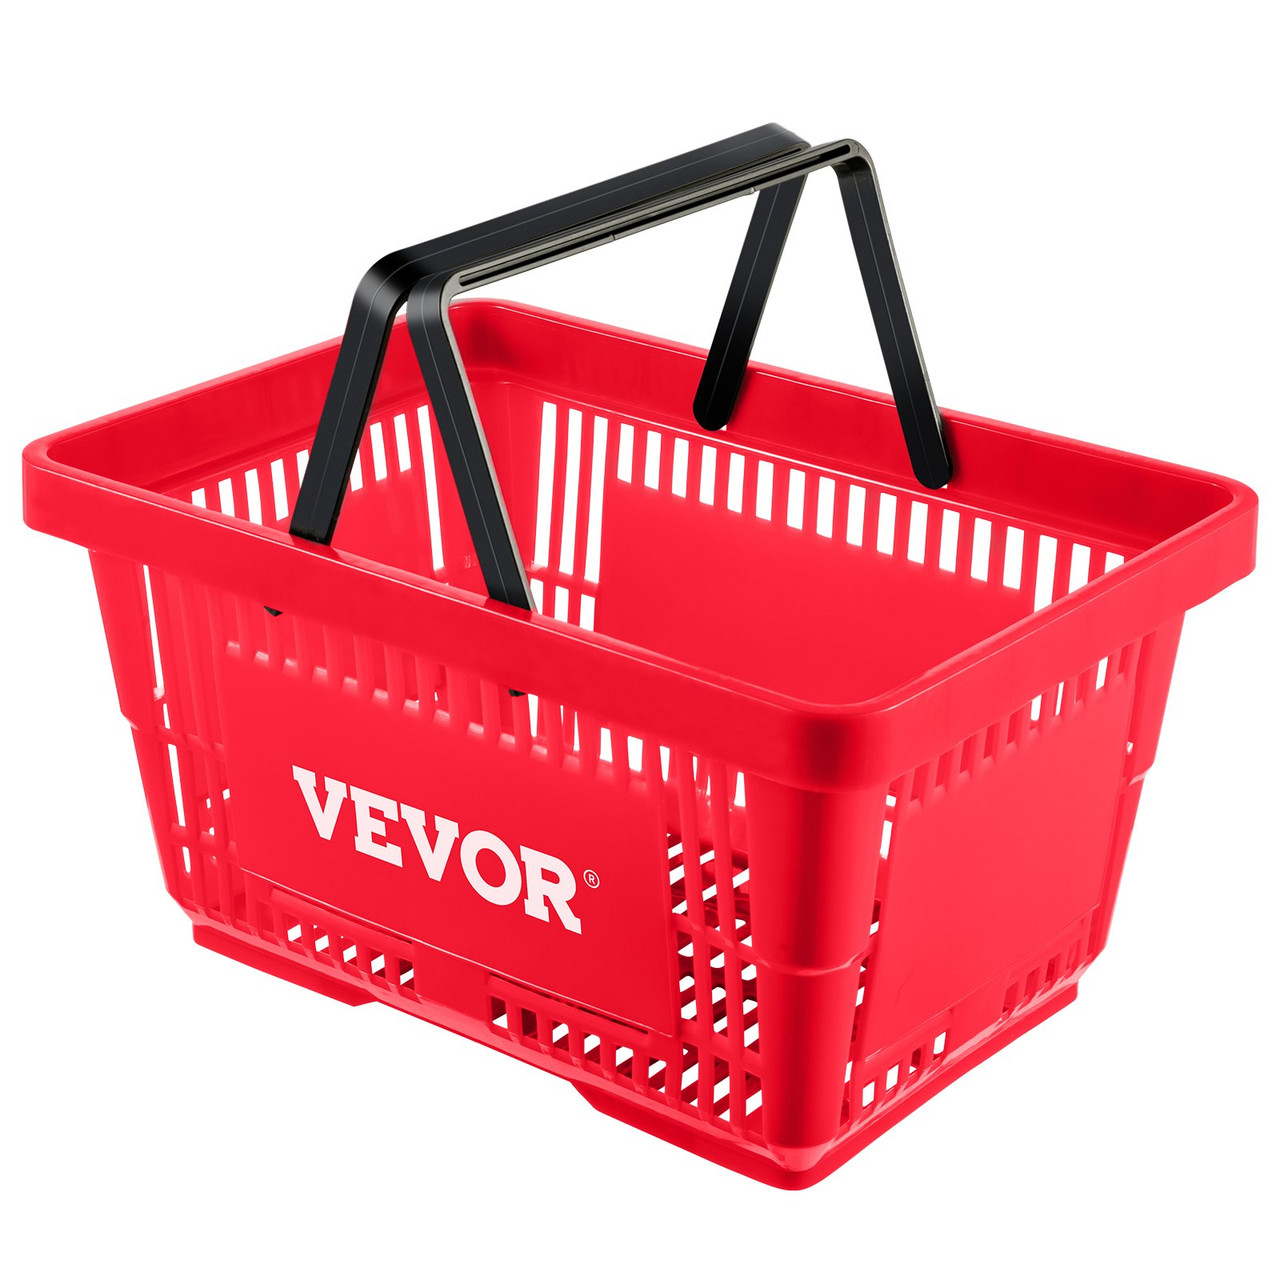 Shopping Basket, 16.9 x 11.8 x 8.7 in/42.8 x 30 x 22 cm((L x W x H), Plastic Handle and Iron Stand, Set of 12 Store Baskets with Durable PE Material